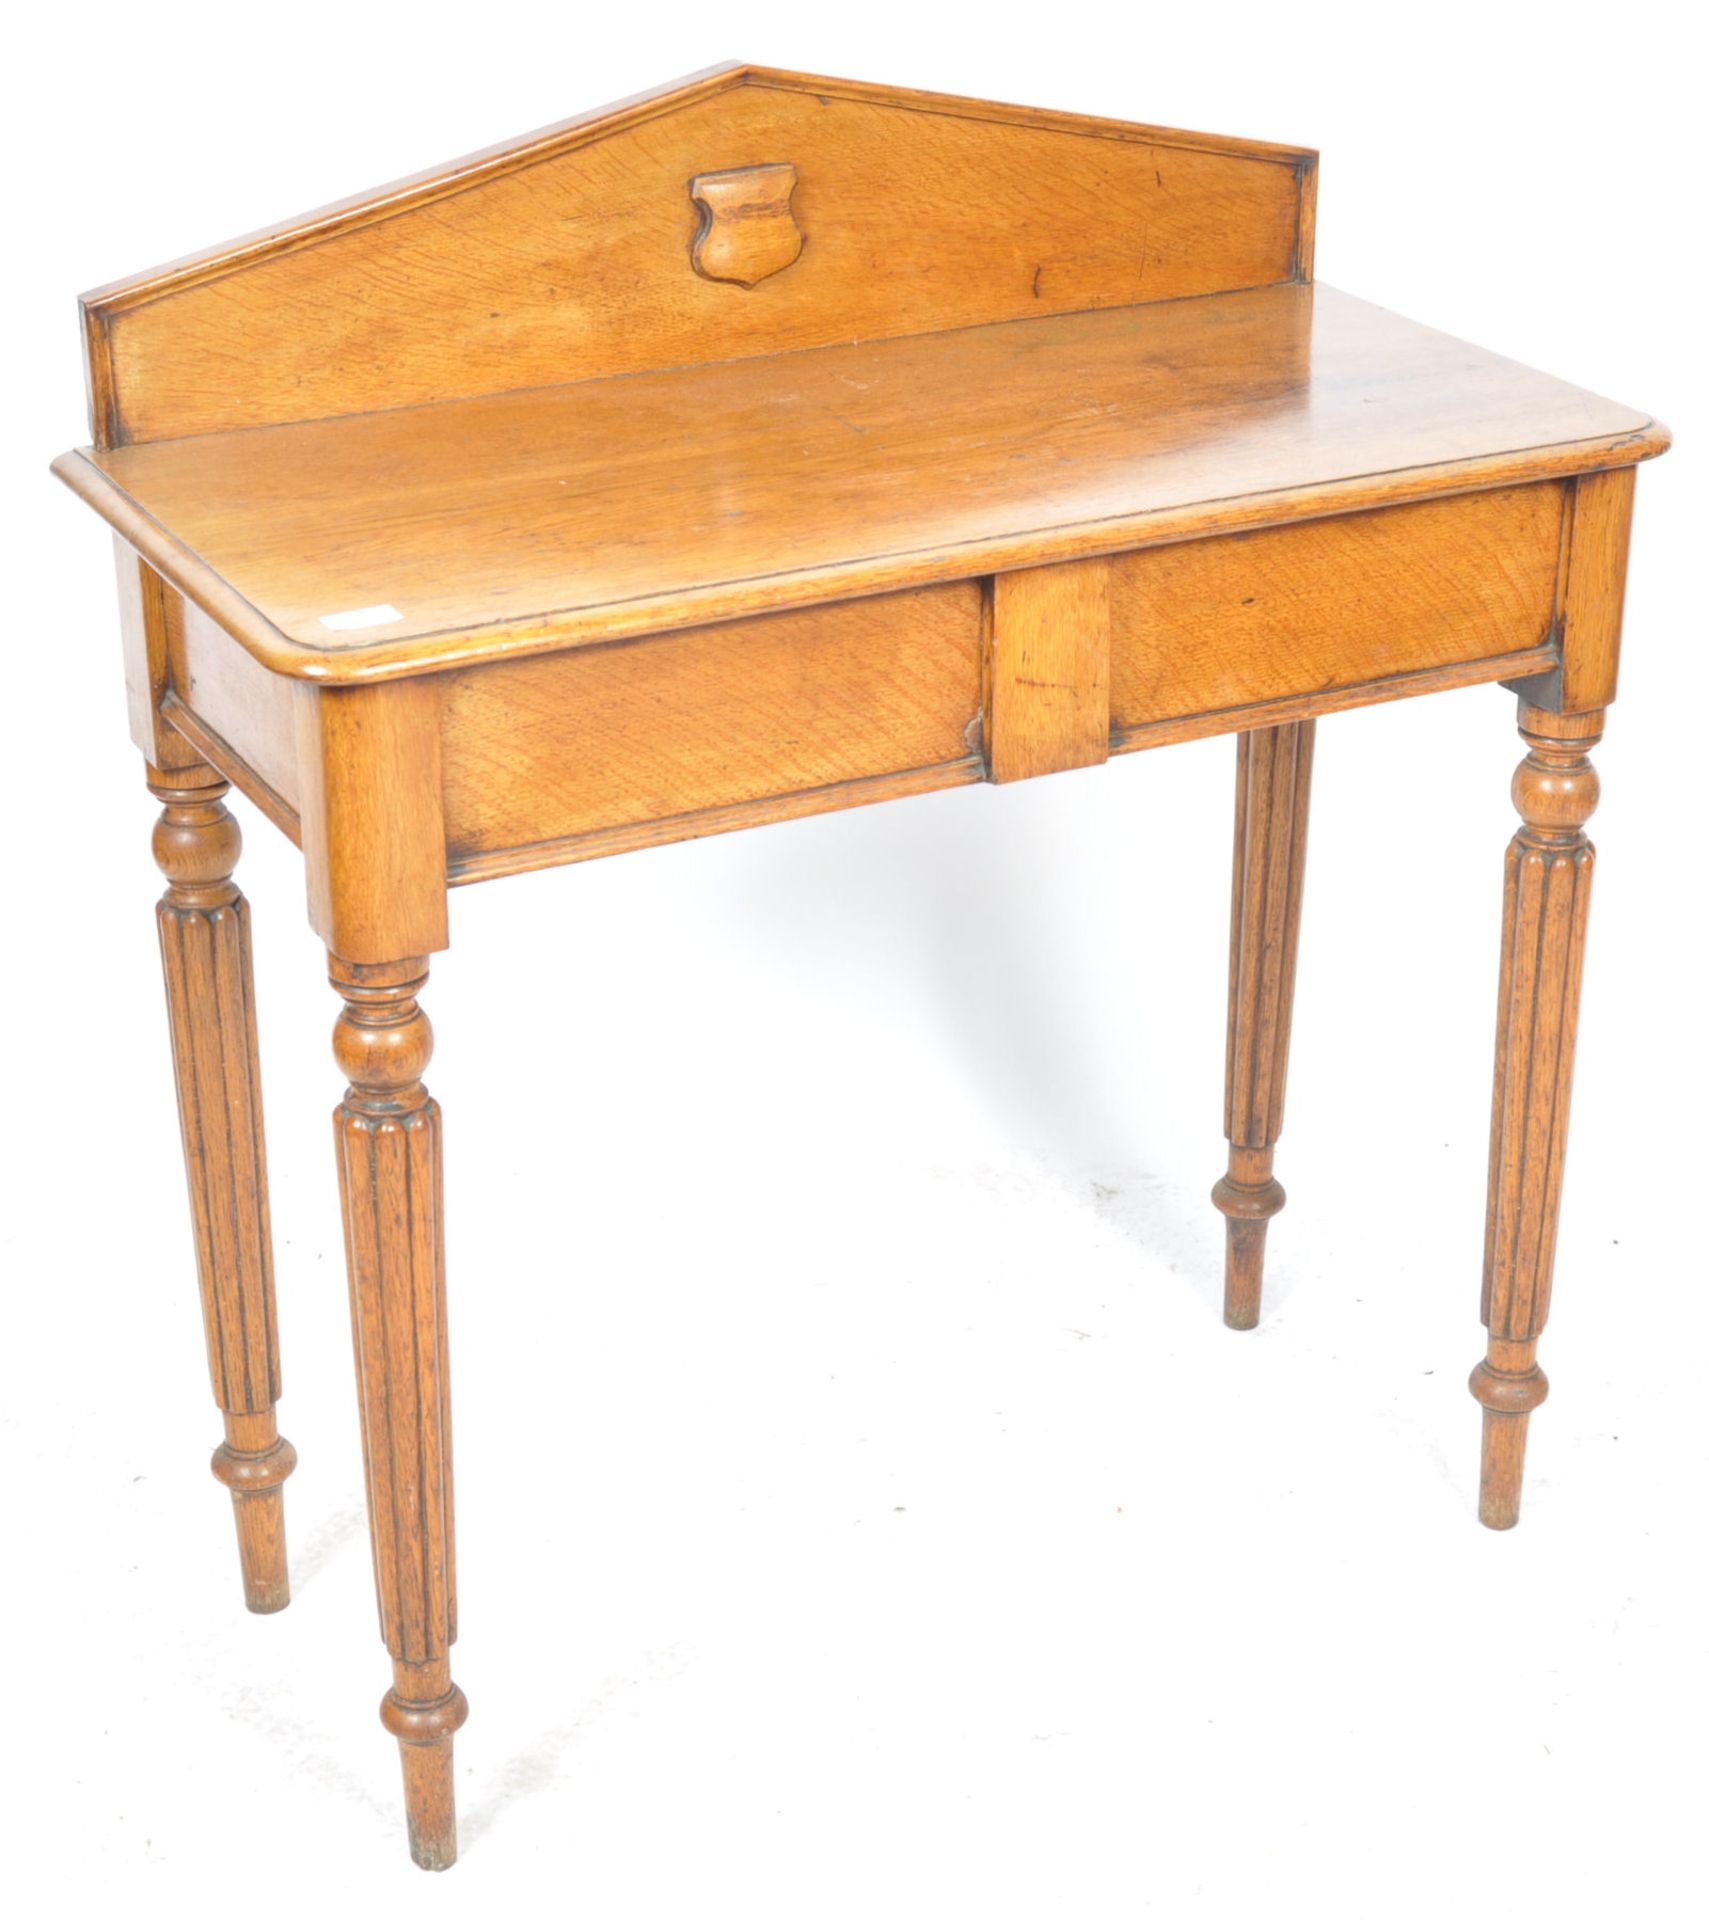 19TH CENTURY VICTORIAN ENGLISH ANTIQUE OAK CONSOLE TABLE - Image 2 of 6